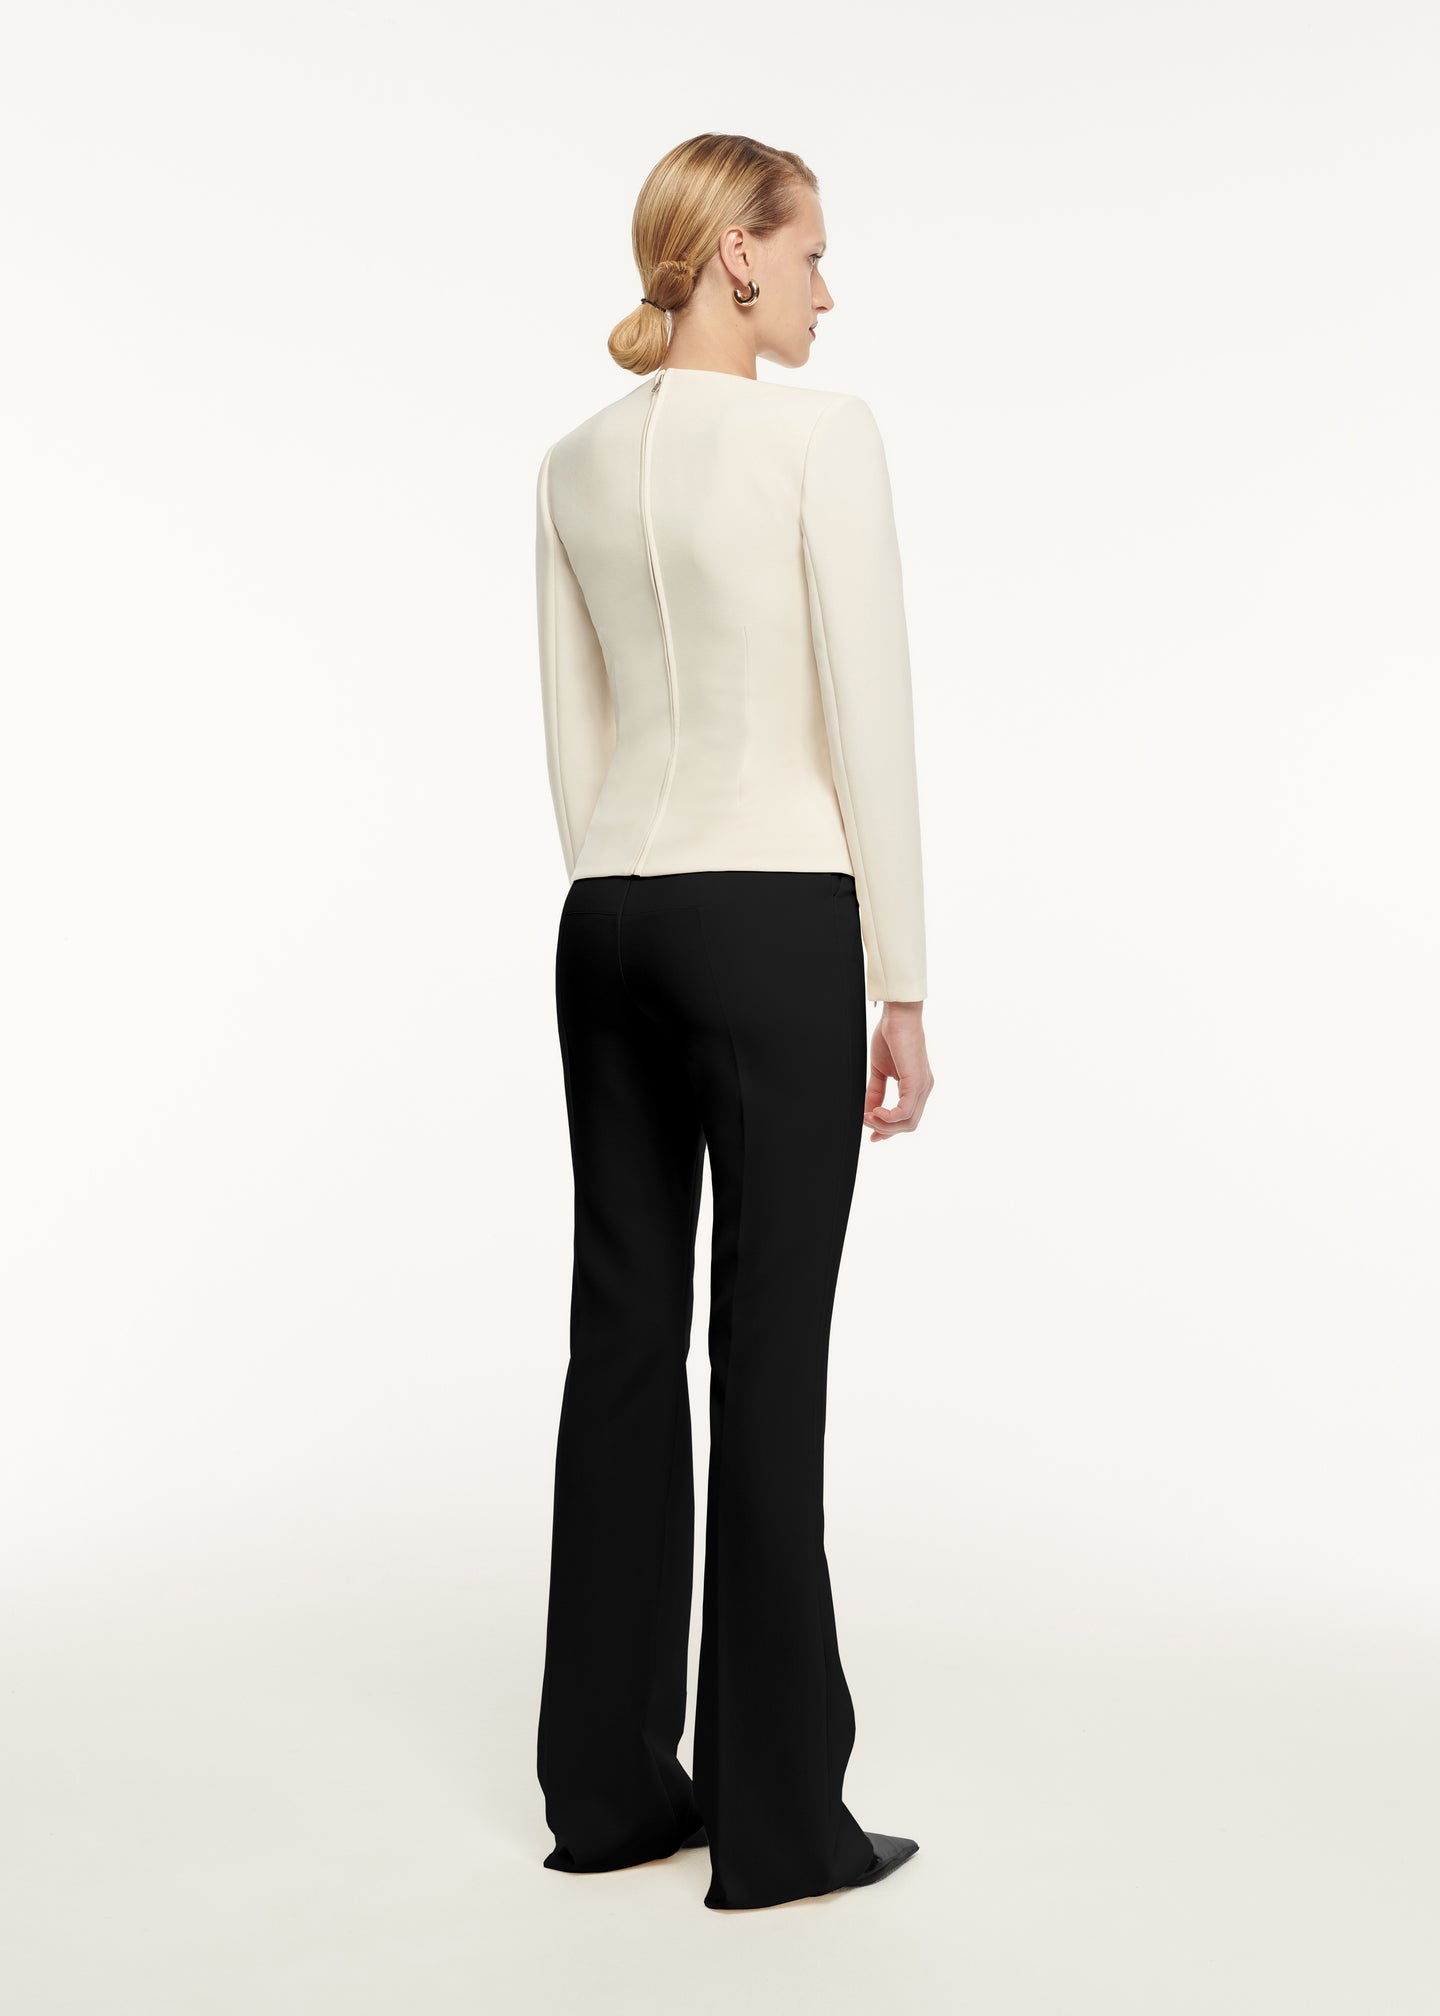 The back of a woman wearing the Tailored Crepe Trouser Black